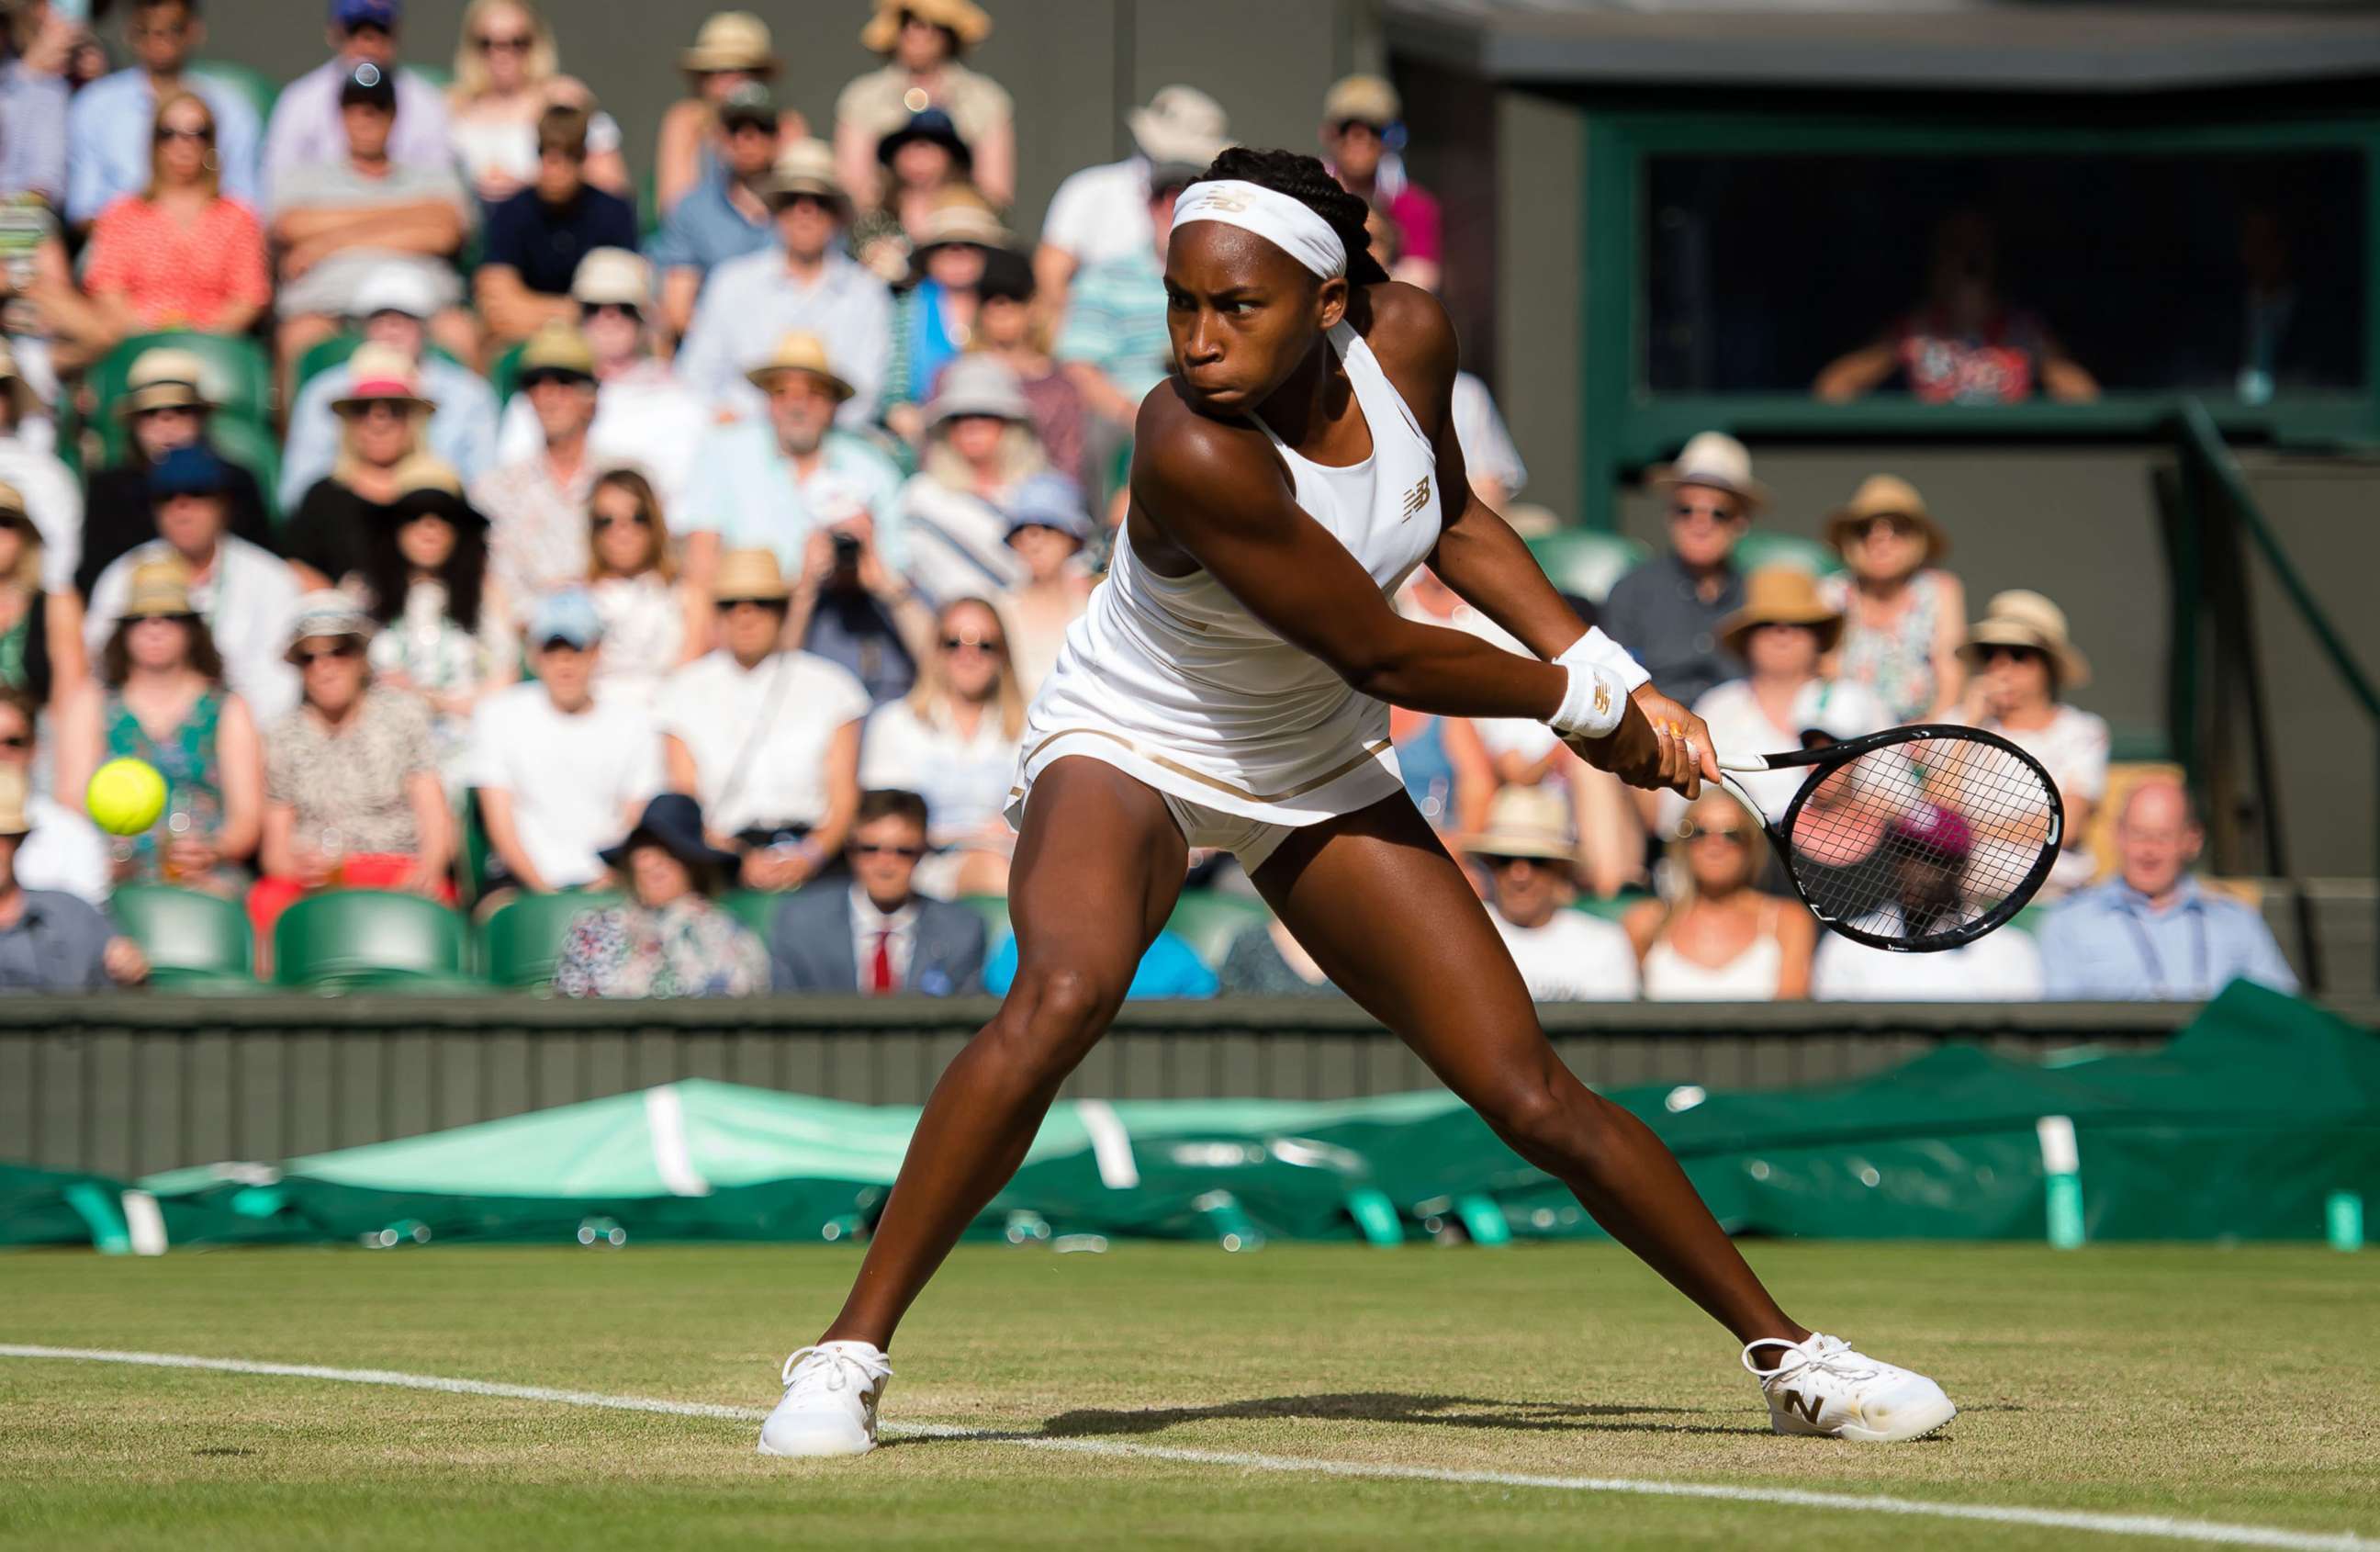 PHOTO: Cori "Coco" Gauff of the United States in action during her third round match on Day 5 of the Wimbledon Tennis Championships in London, July 5, 2019.